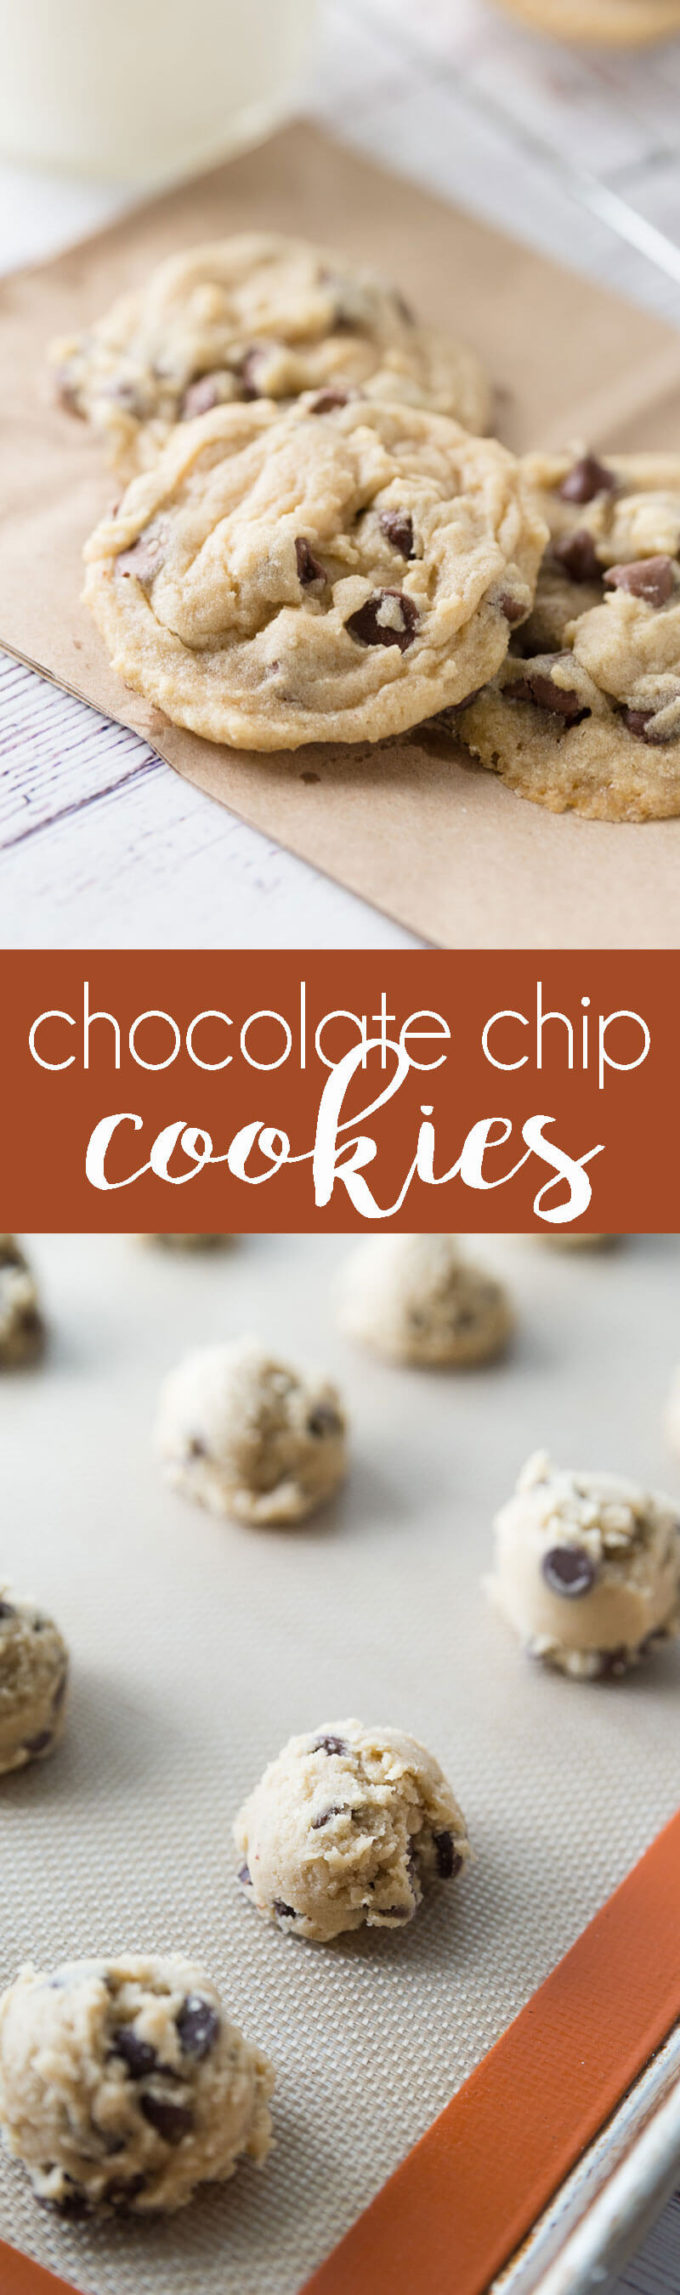 Chocolate Chip Cookies: A basic but delicious recipe for soft, chewy, fluffy chocolate chip cookies